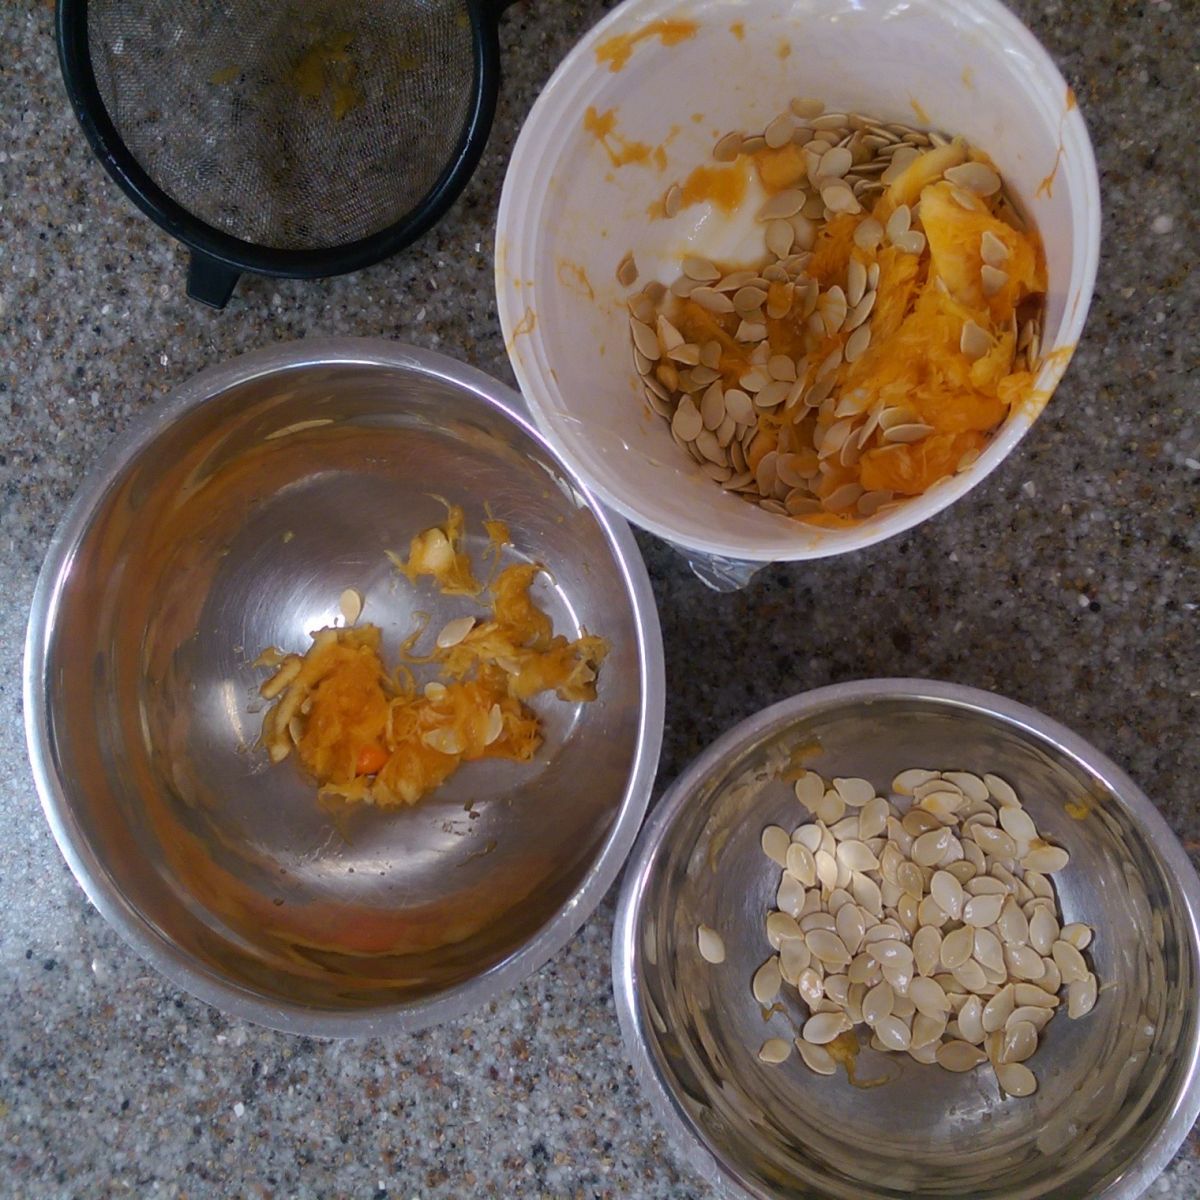 Seperate your bowls of pumpkin pith and seeds.